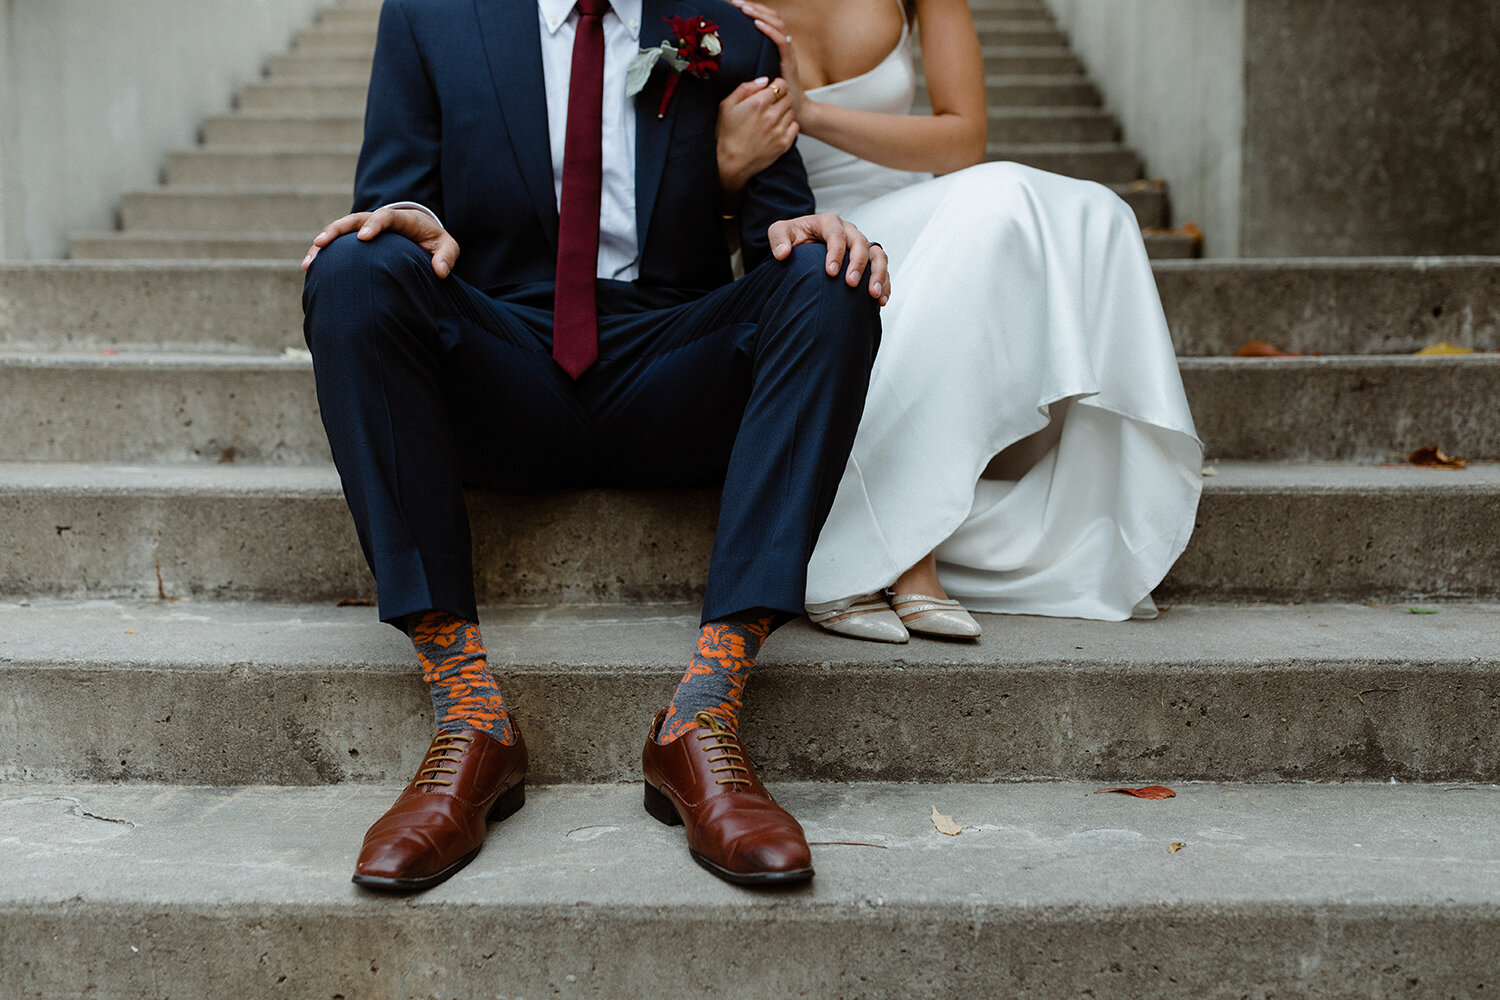 Small-Intimate-Elopement-Downtown-Toronto-U-of-T-Vows-where-to-elope-in-toronto-26.JPG